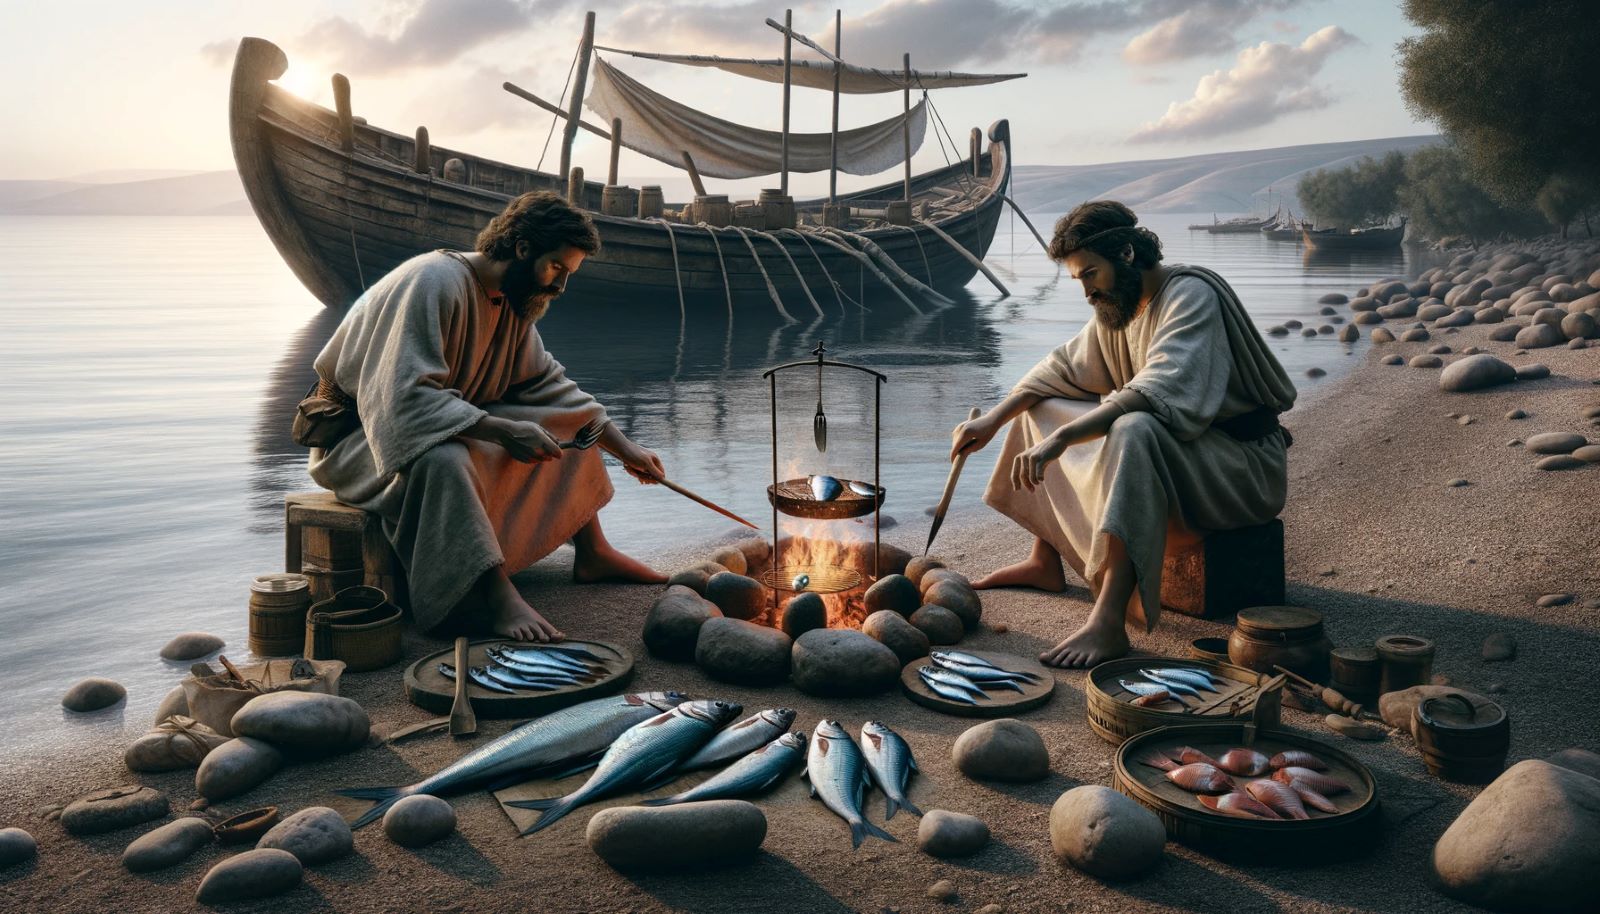 What Foods Did The Apostles Eat?